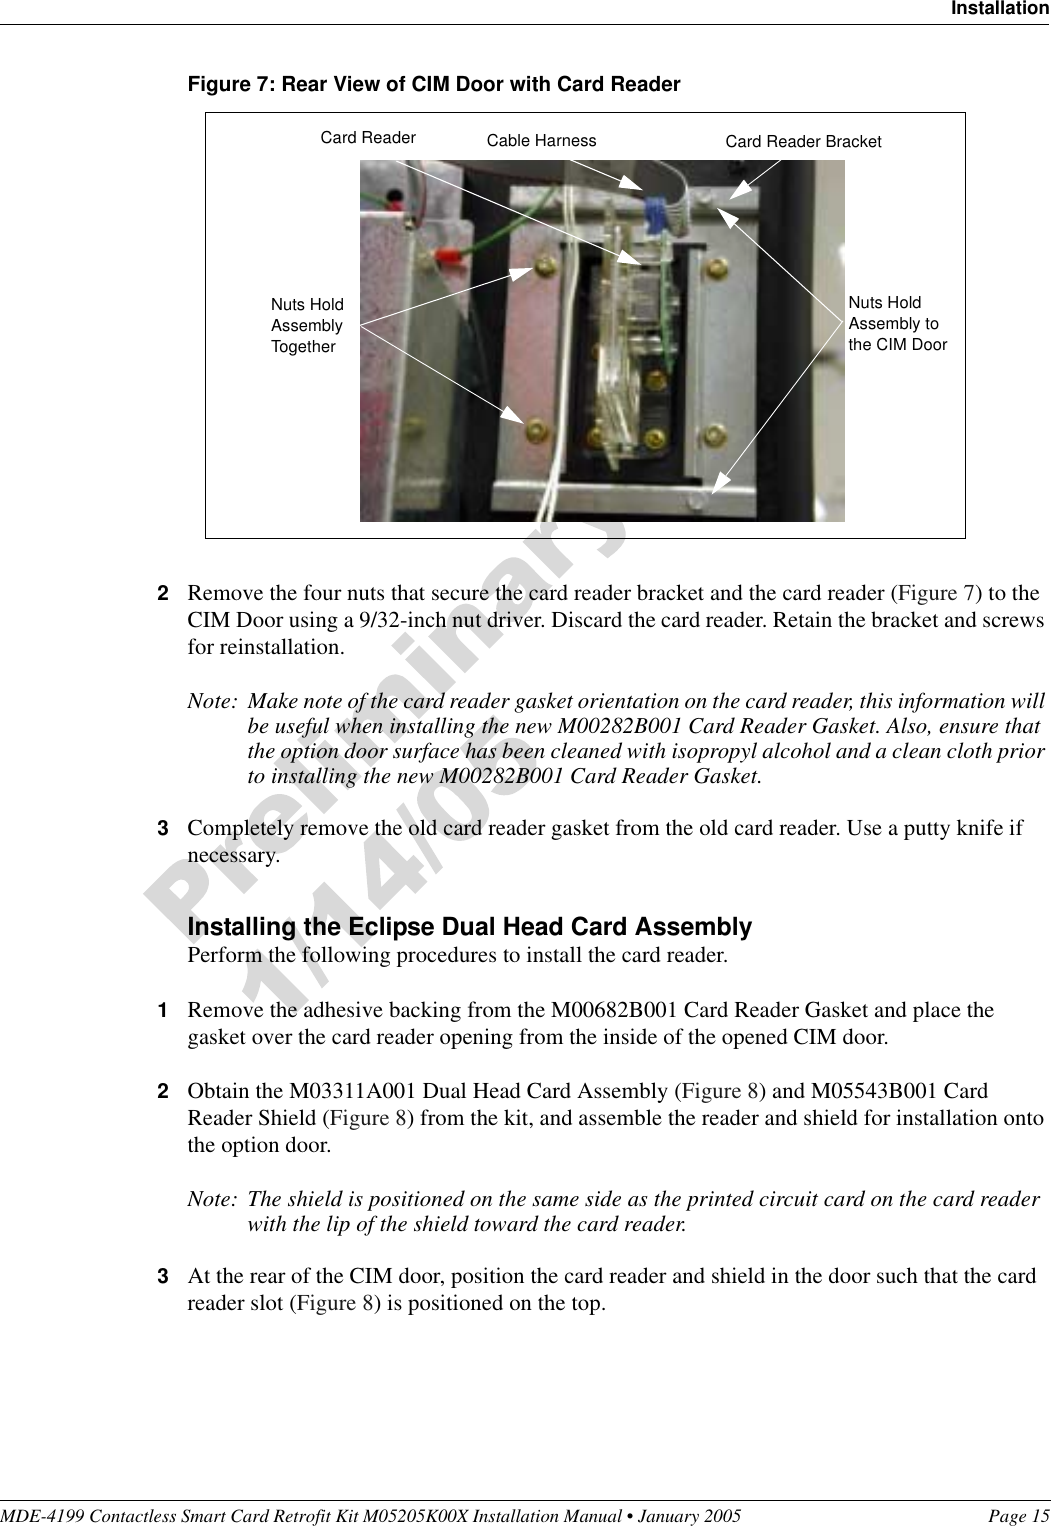 MDE-4199 Contactless Smart Card Retrofit Kit M05205K00X Installation Manual • January 2005 Page 15InstallationFigure 7: Rear View of CIM Door with Card Reader2Remove the four nuts that secure the card reader bracket and the card reader (Figure 7) to the CIM Door using a 9/32-inch nut driver. Discard the card reader. Retain the bracket and screws for reinstallation.Note: Make note of the card reader gasket orientation on the card reader, this information will be useful when installing the new M00282B001 Card Reader Gasket. Also, ensure that the option door surface has been cleaned with isopropyl alcohol and a clean cloth prior to installing the new M00282B001 Card Reader Gasket.3Completely remove the old card reader gasket from the old card reader. Use a putty knife if necessary.Installing the Eclipse Dual Head Card AssemblyPerform the following procedures to install the card reader.1Remove the adhesive backing from the M00682B001 Card Reader Gasket and place the gasket over the card reader opening from the inside of the opened CIM door.2Obtain the M03311A001 Dual Head Card Assembly (Figure 8) and M05543B001 Card Reader Shield (Figure 8) from the kit, and assemble the reader and shield for installation onto the option door.Note: The shield is positioned on the same side as the printed circuit card on the card reader with the lip of the shield toward the card reader.3At the rear of the CIM door, position the card reader and shield in the door such that the card reader slot (Figure 8) is positioned on the top.Nuts Hold Assembly TogetherCable HarnessNuts Hold Assembly to the CIM DoorCard Reader BracketCard Reader